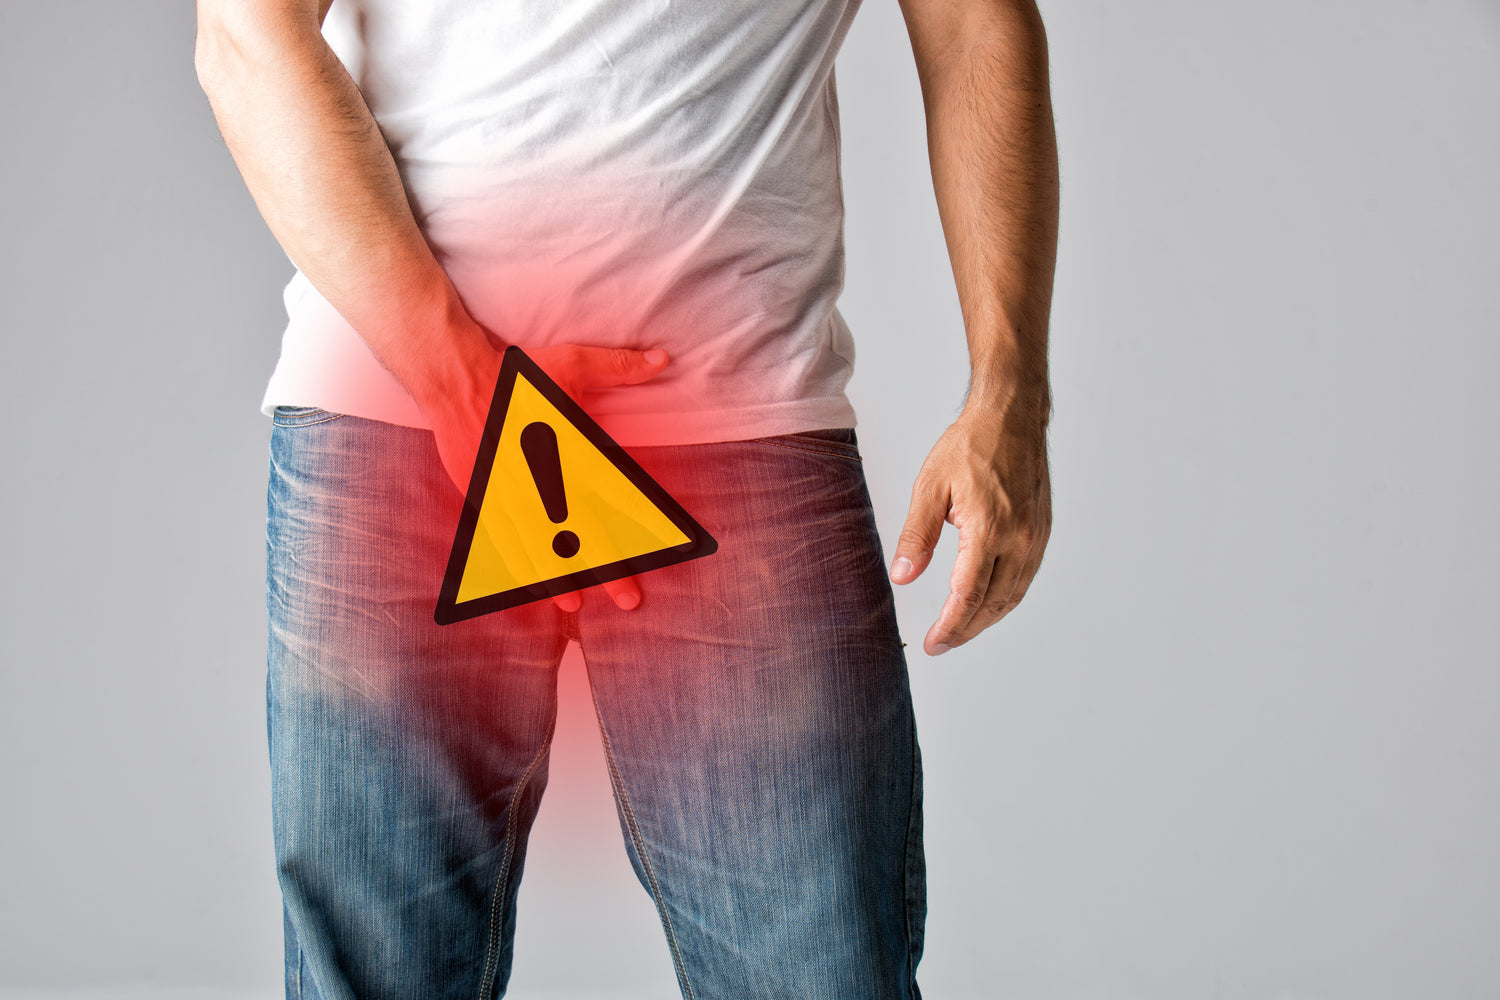 Jock Itch: Symptoms, Causes, and Treatments